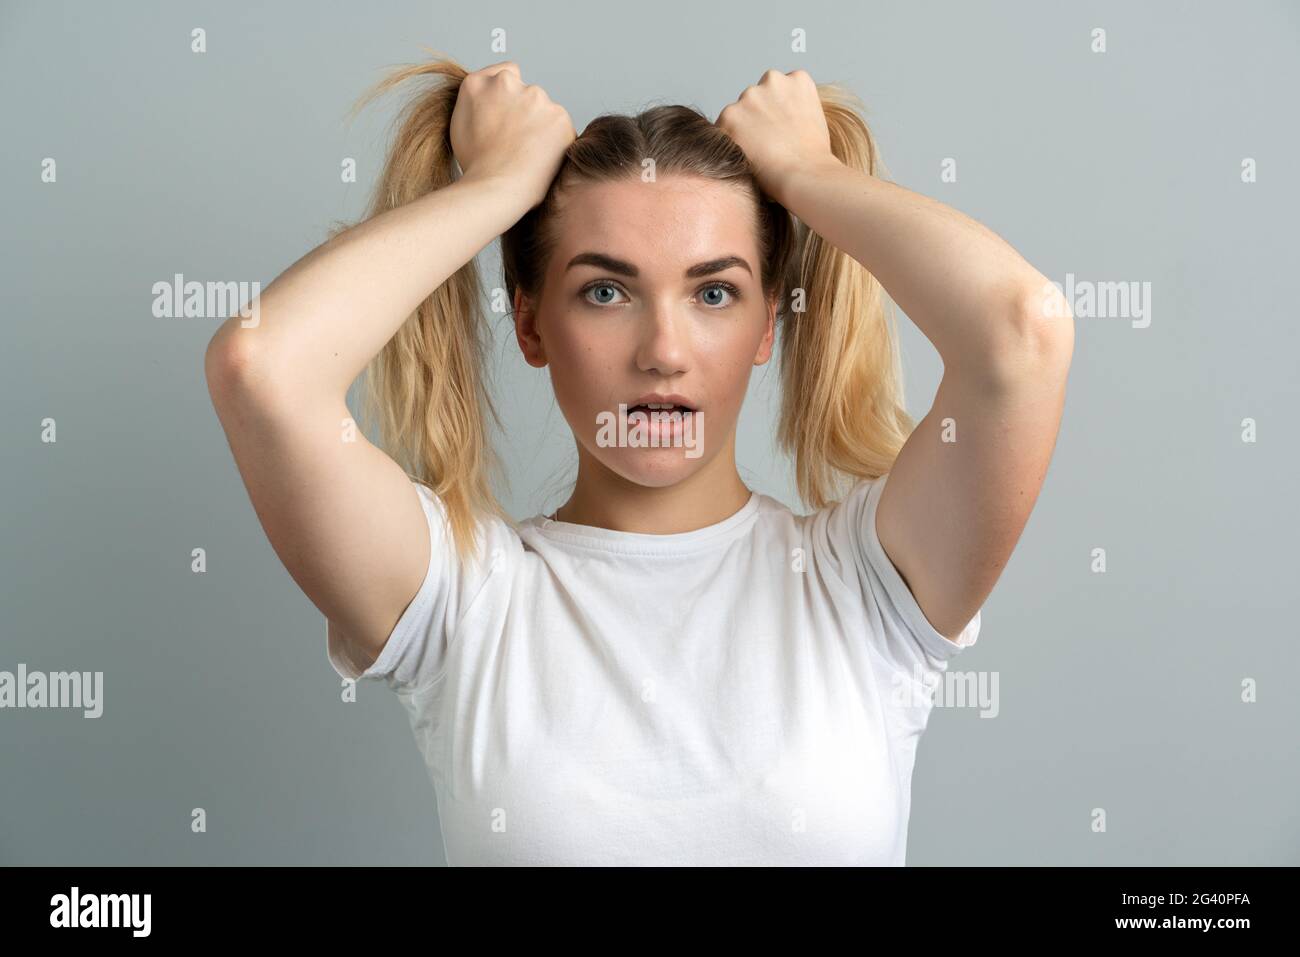 Girl with a shocking look on a gray background. Beautiful, young girl holding two ponytails from her hair. Stock Photo